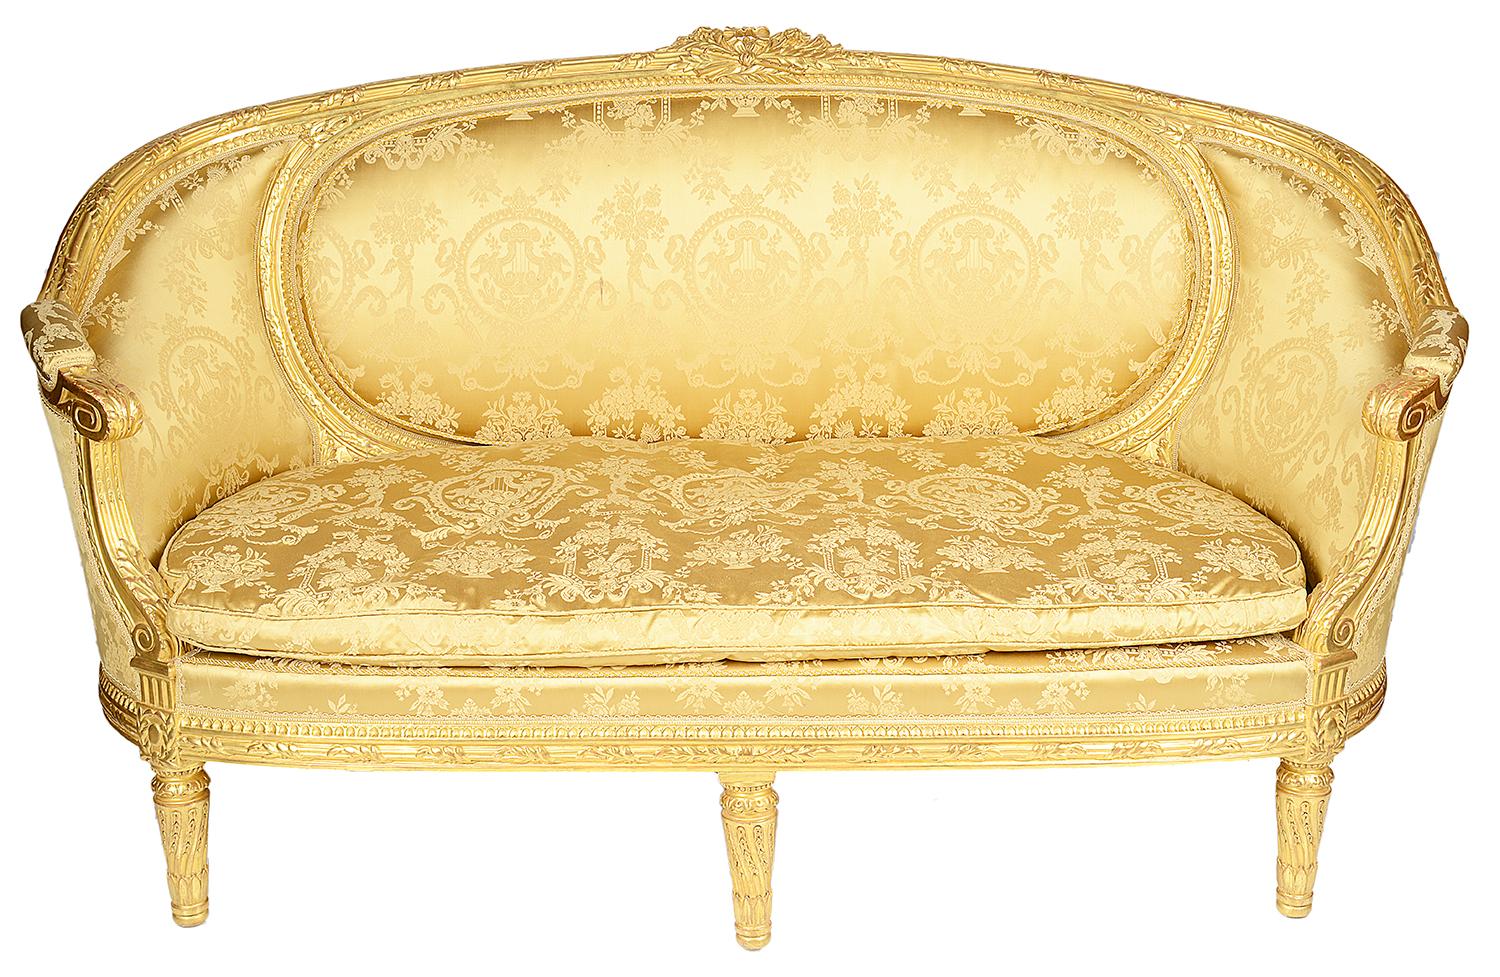 Giltwood Louis XVI Style Gilded French Salon Suite, 19th Century